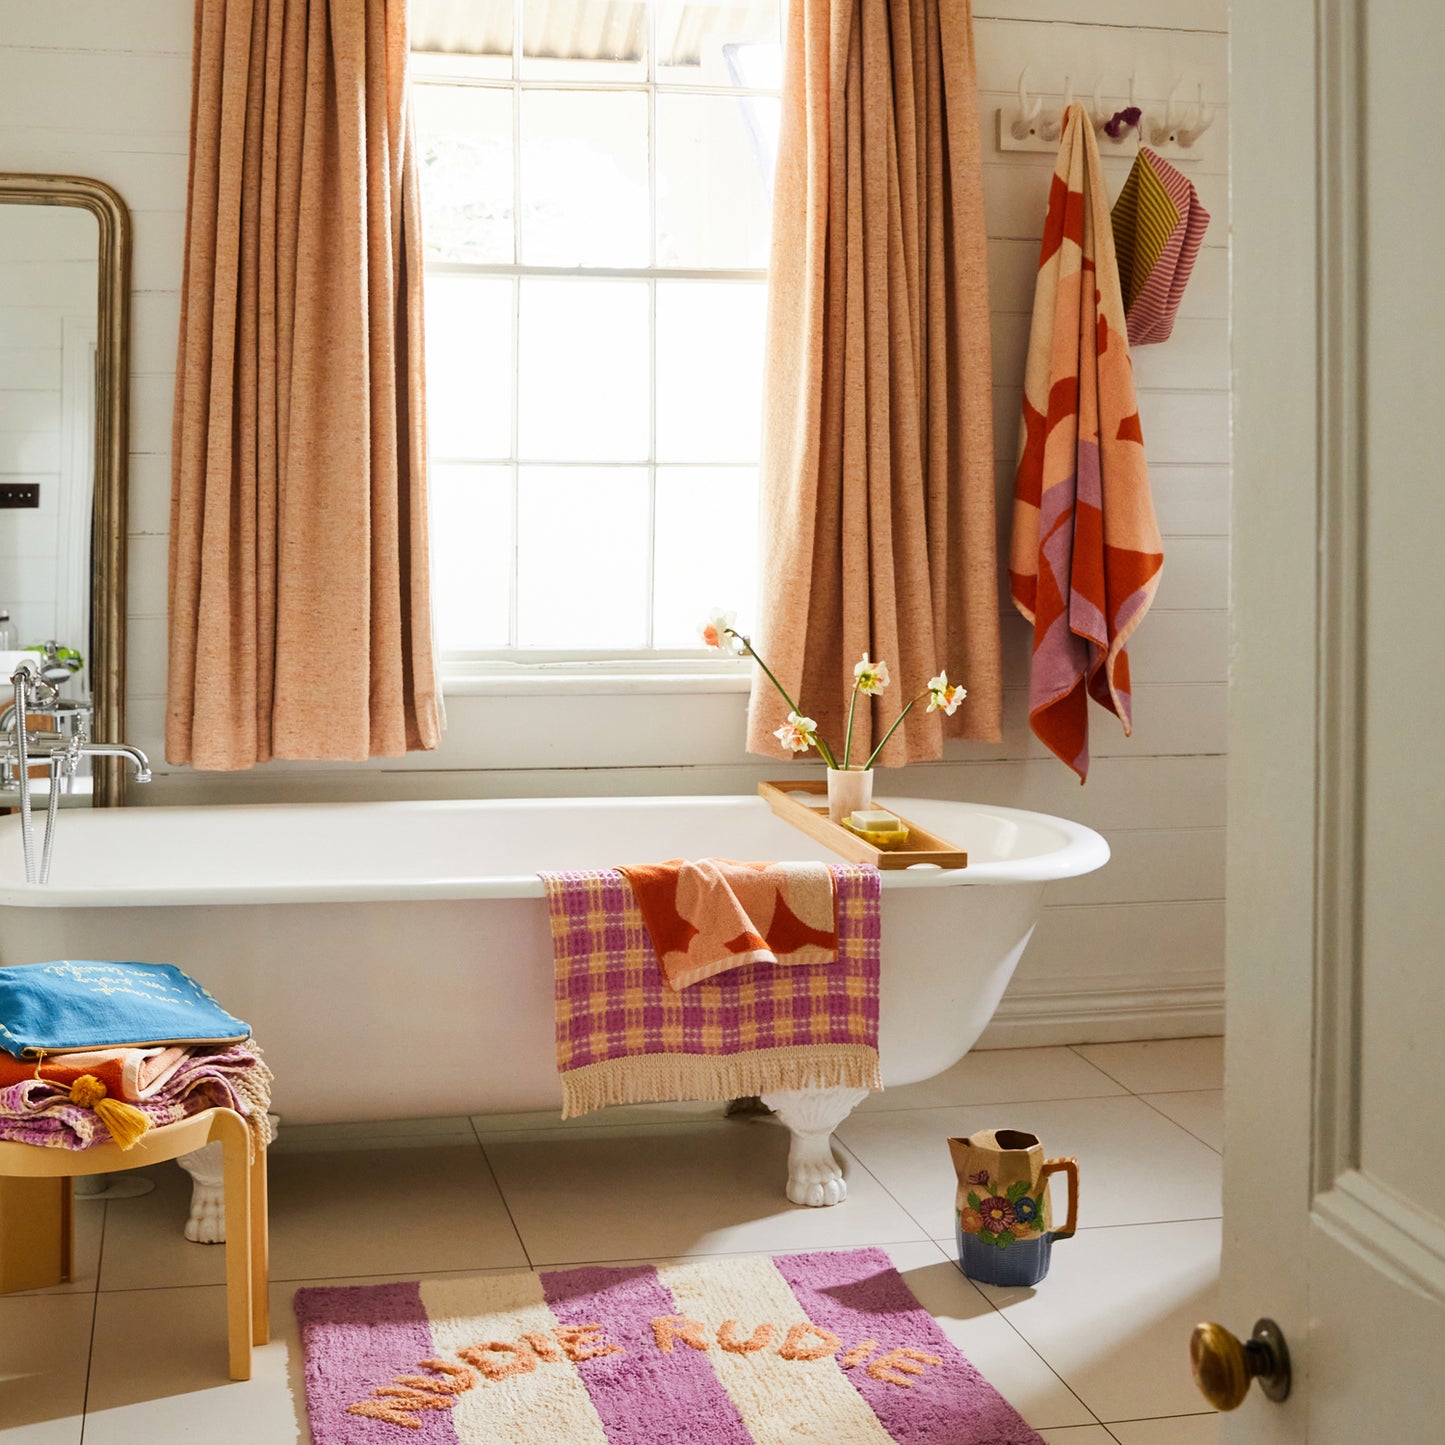 Manning Floral Towel - Persimmon